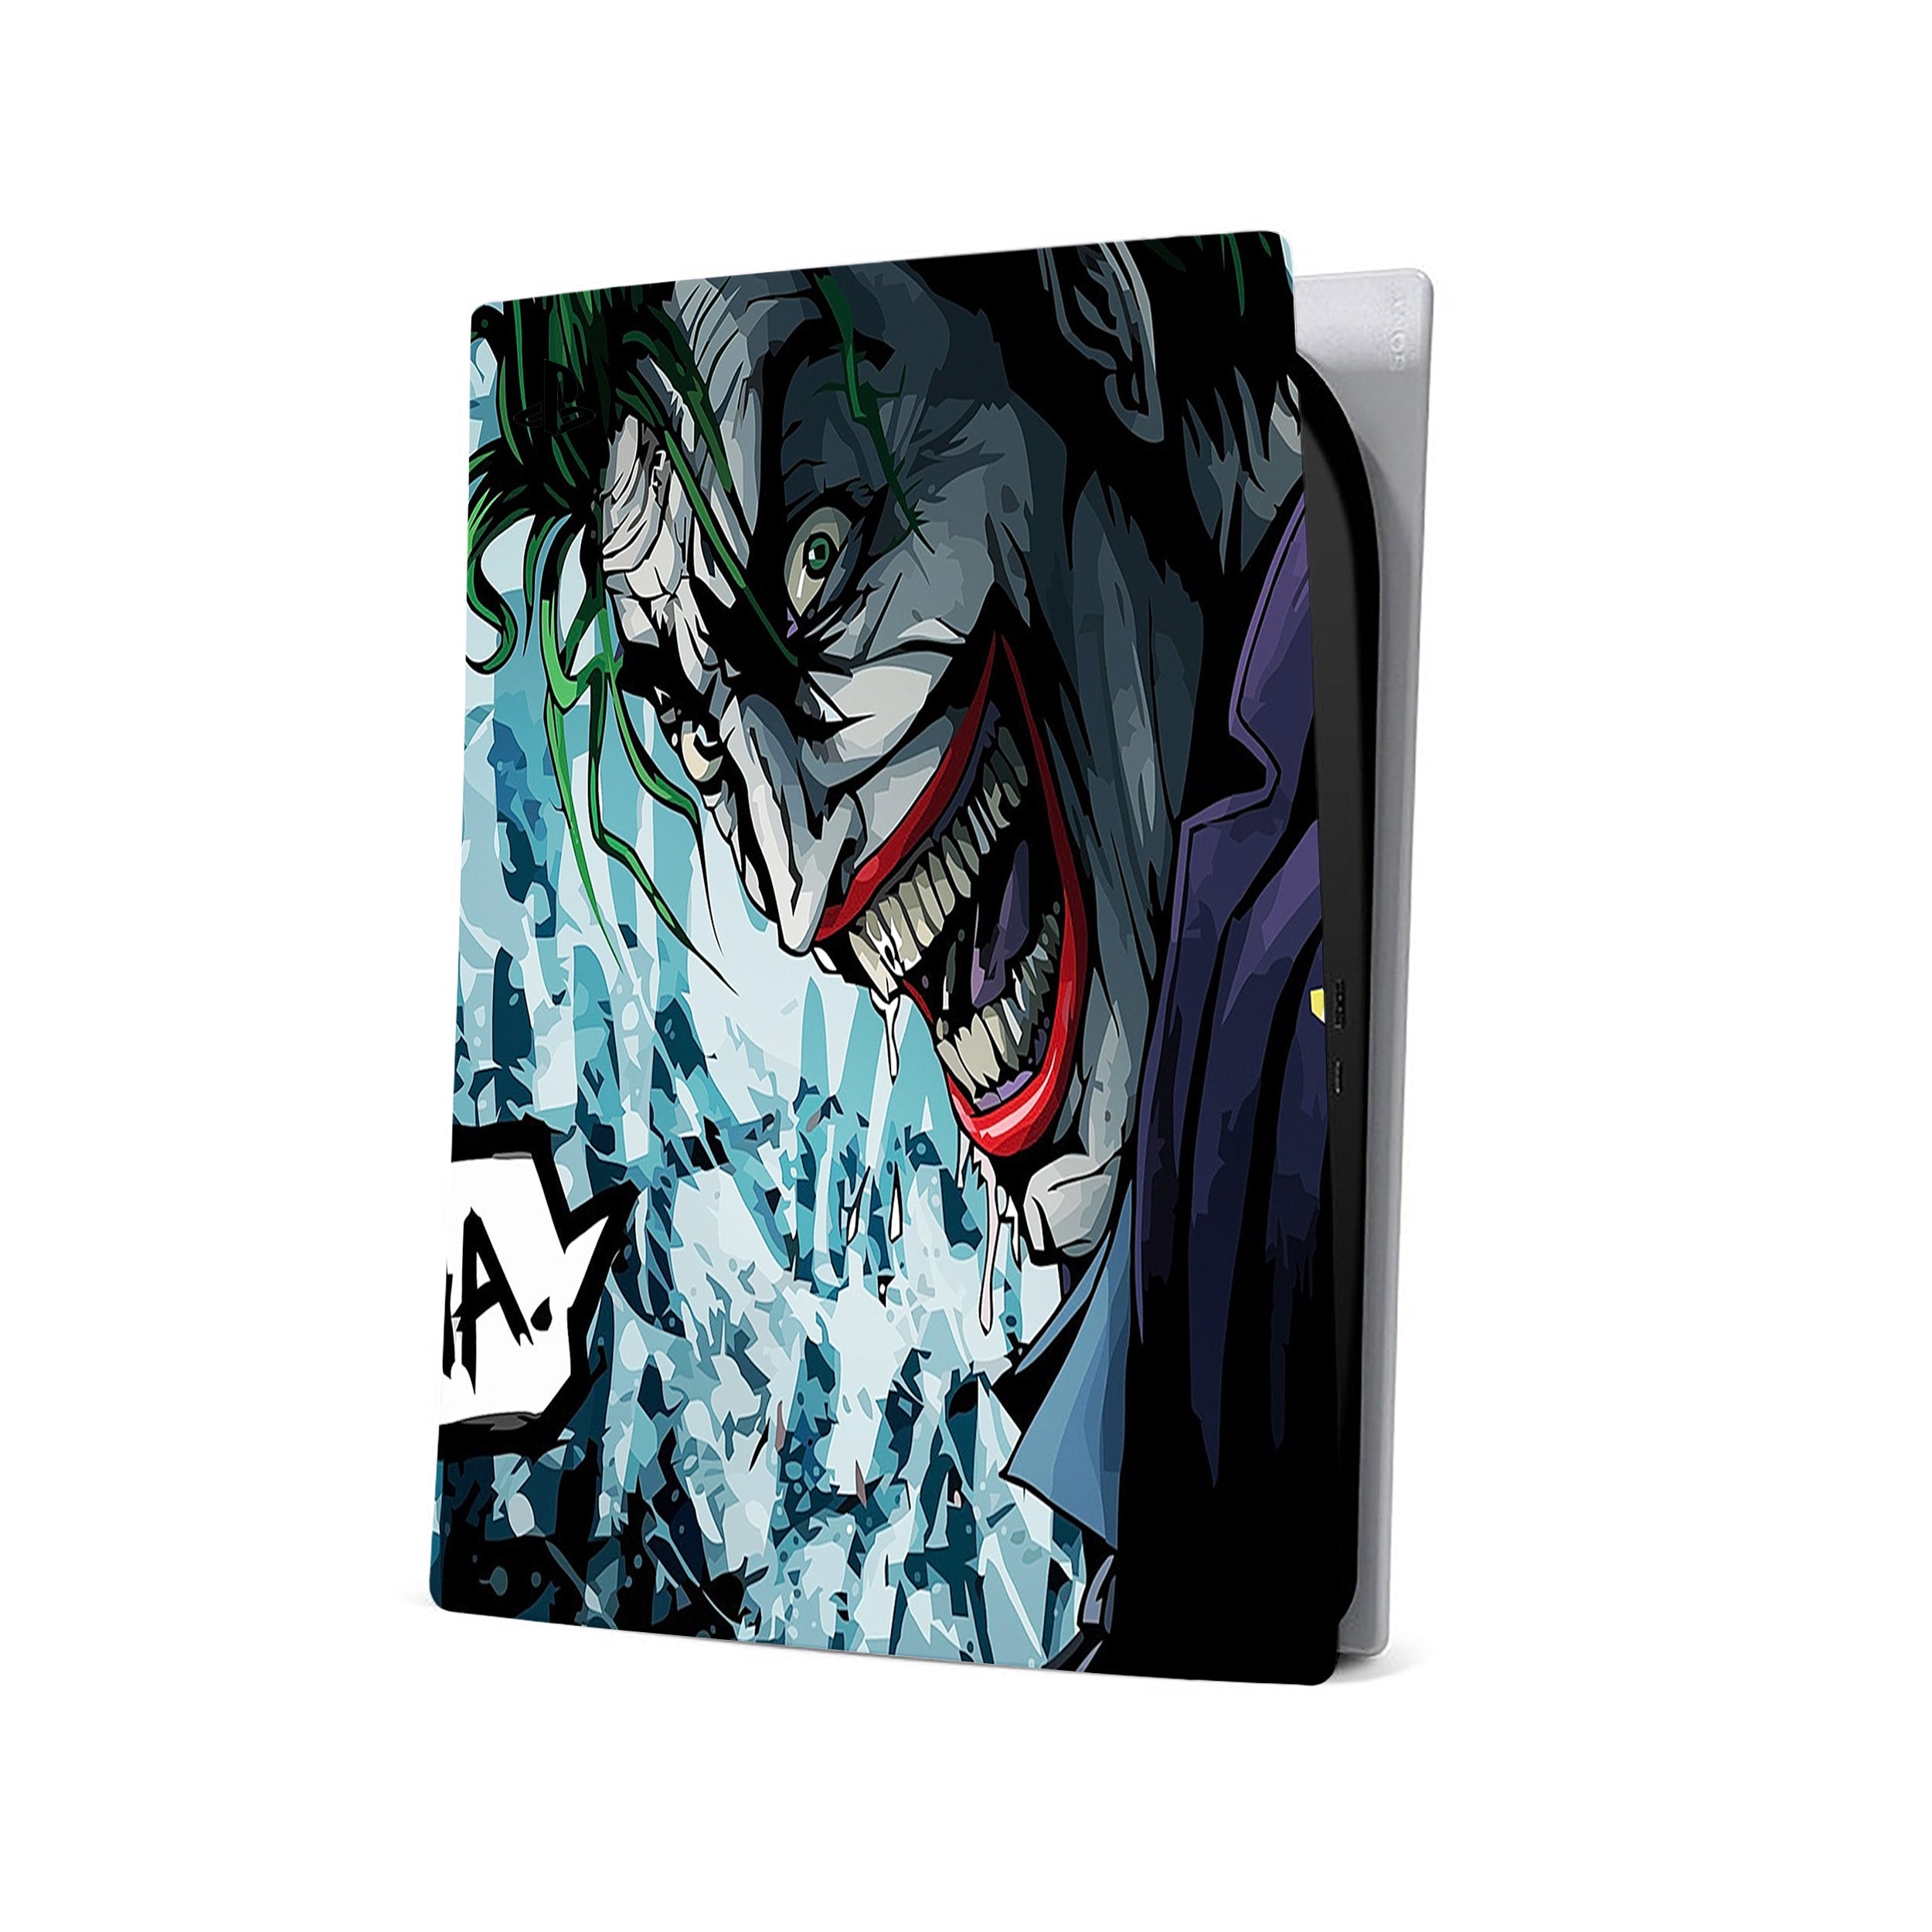 A video game skin featuring a DC Joker design for the PS5.